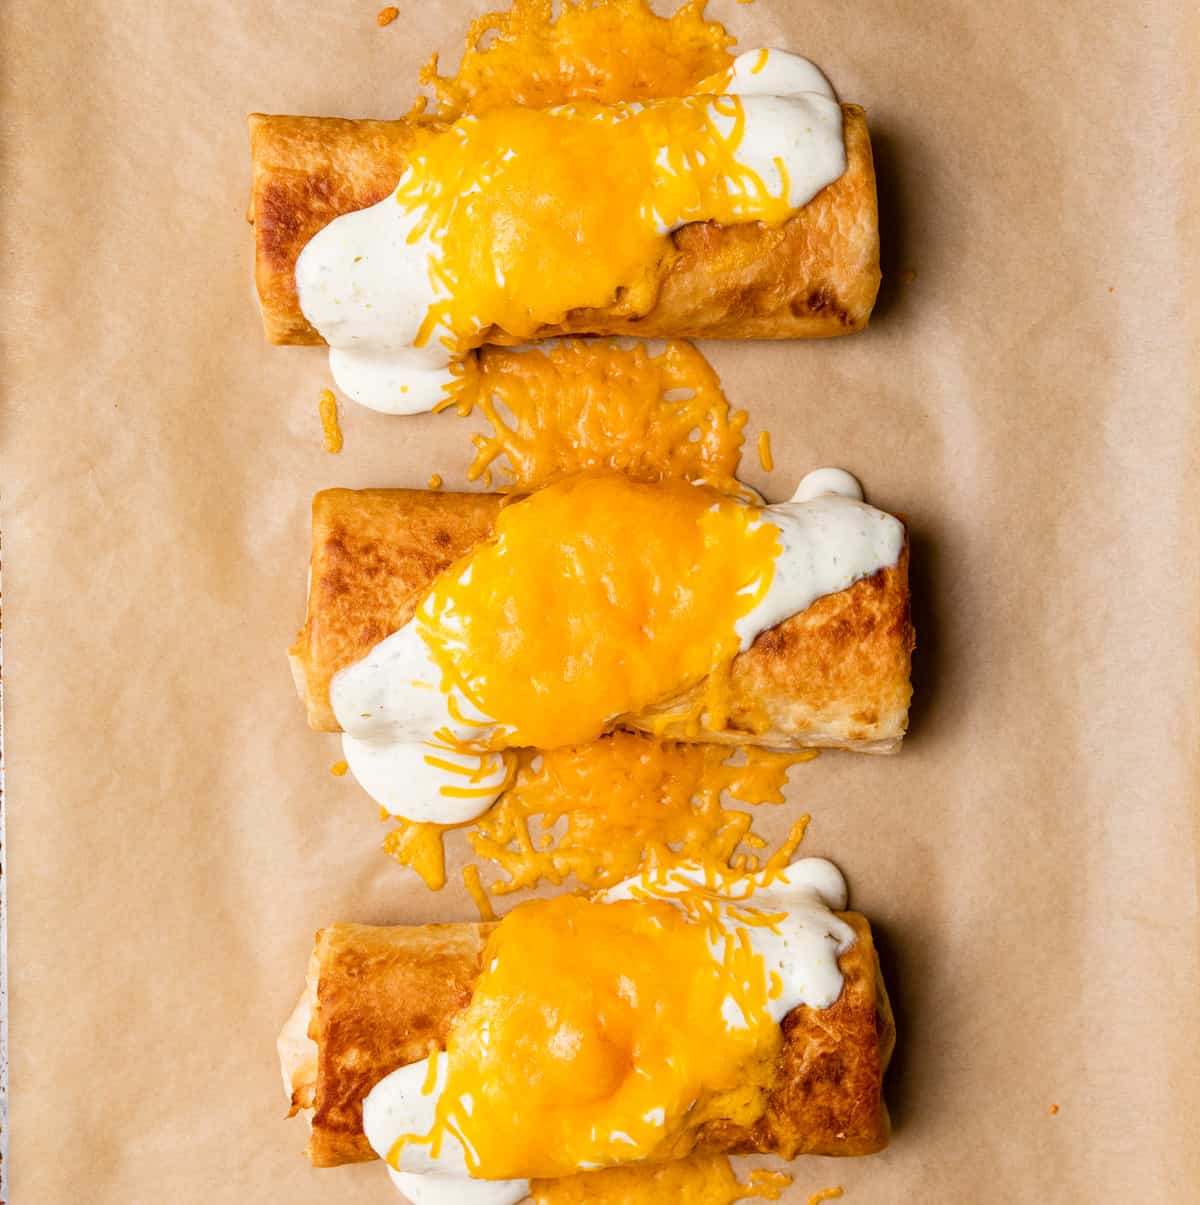 Broiled chimichangas